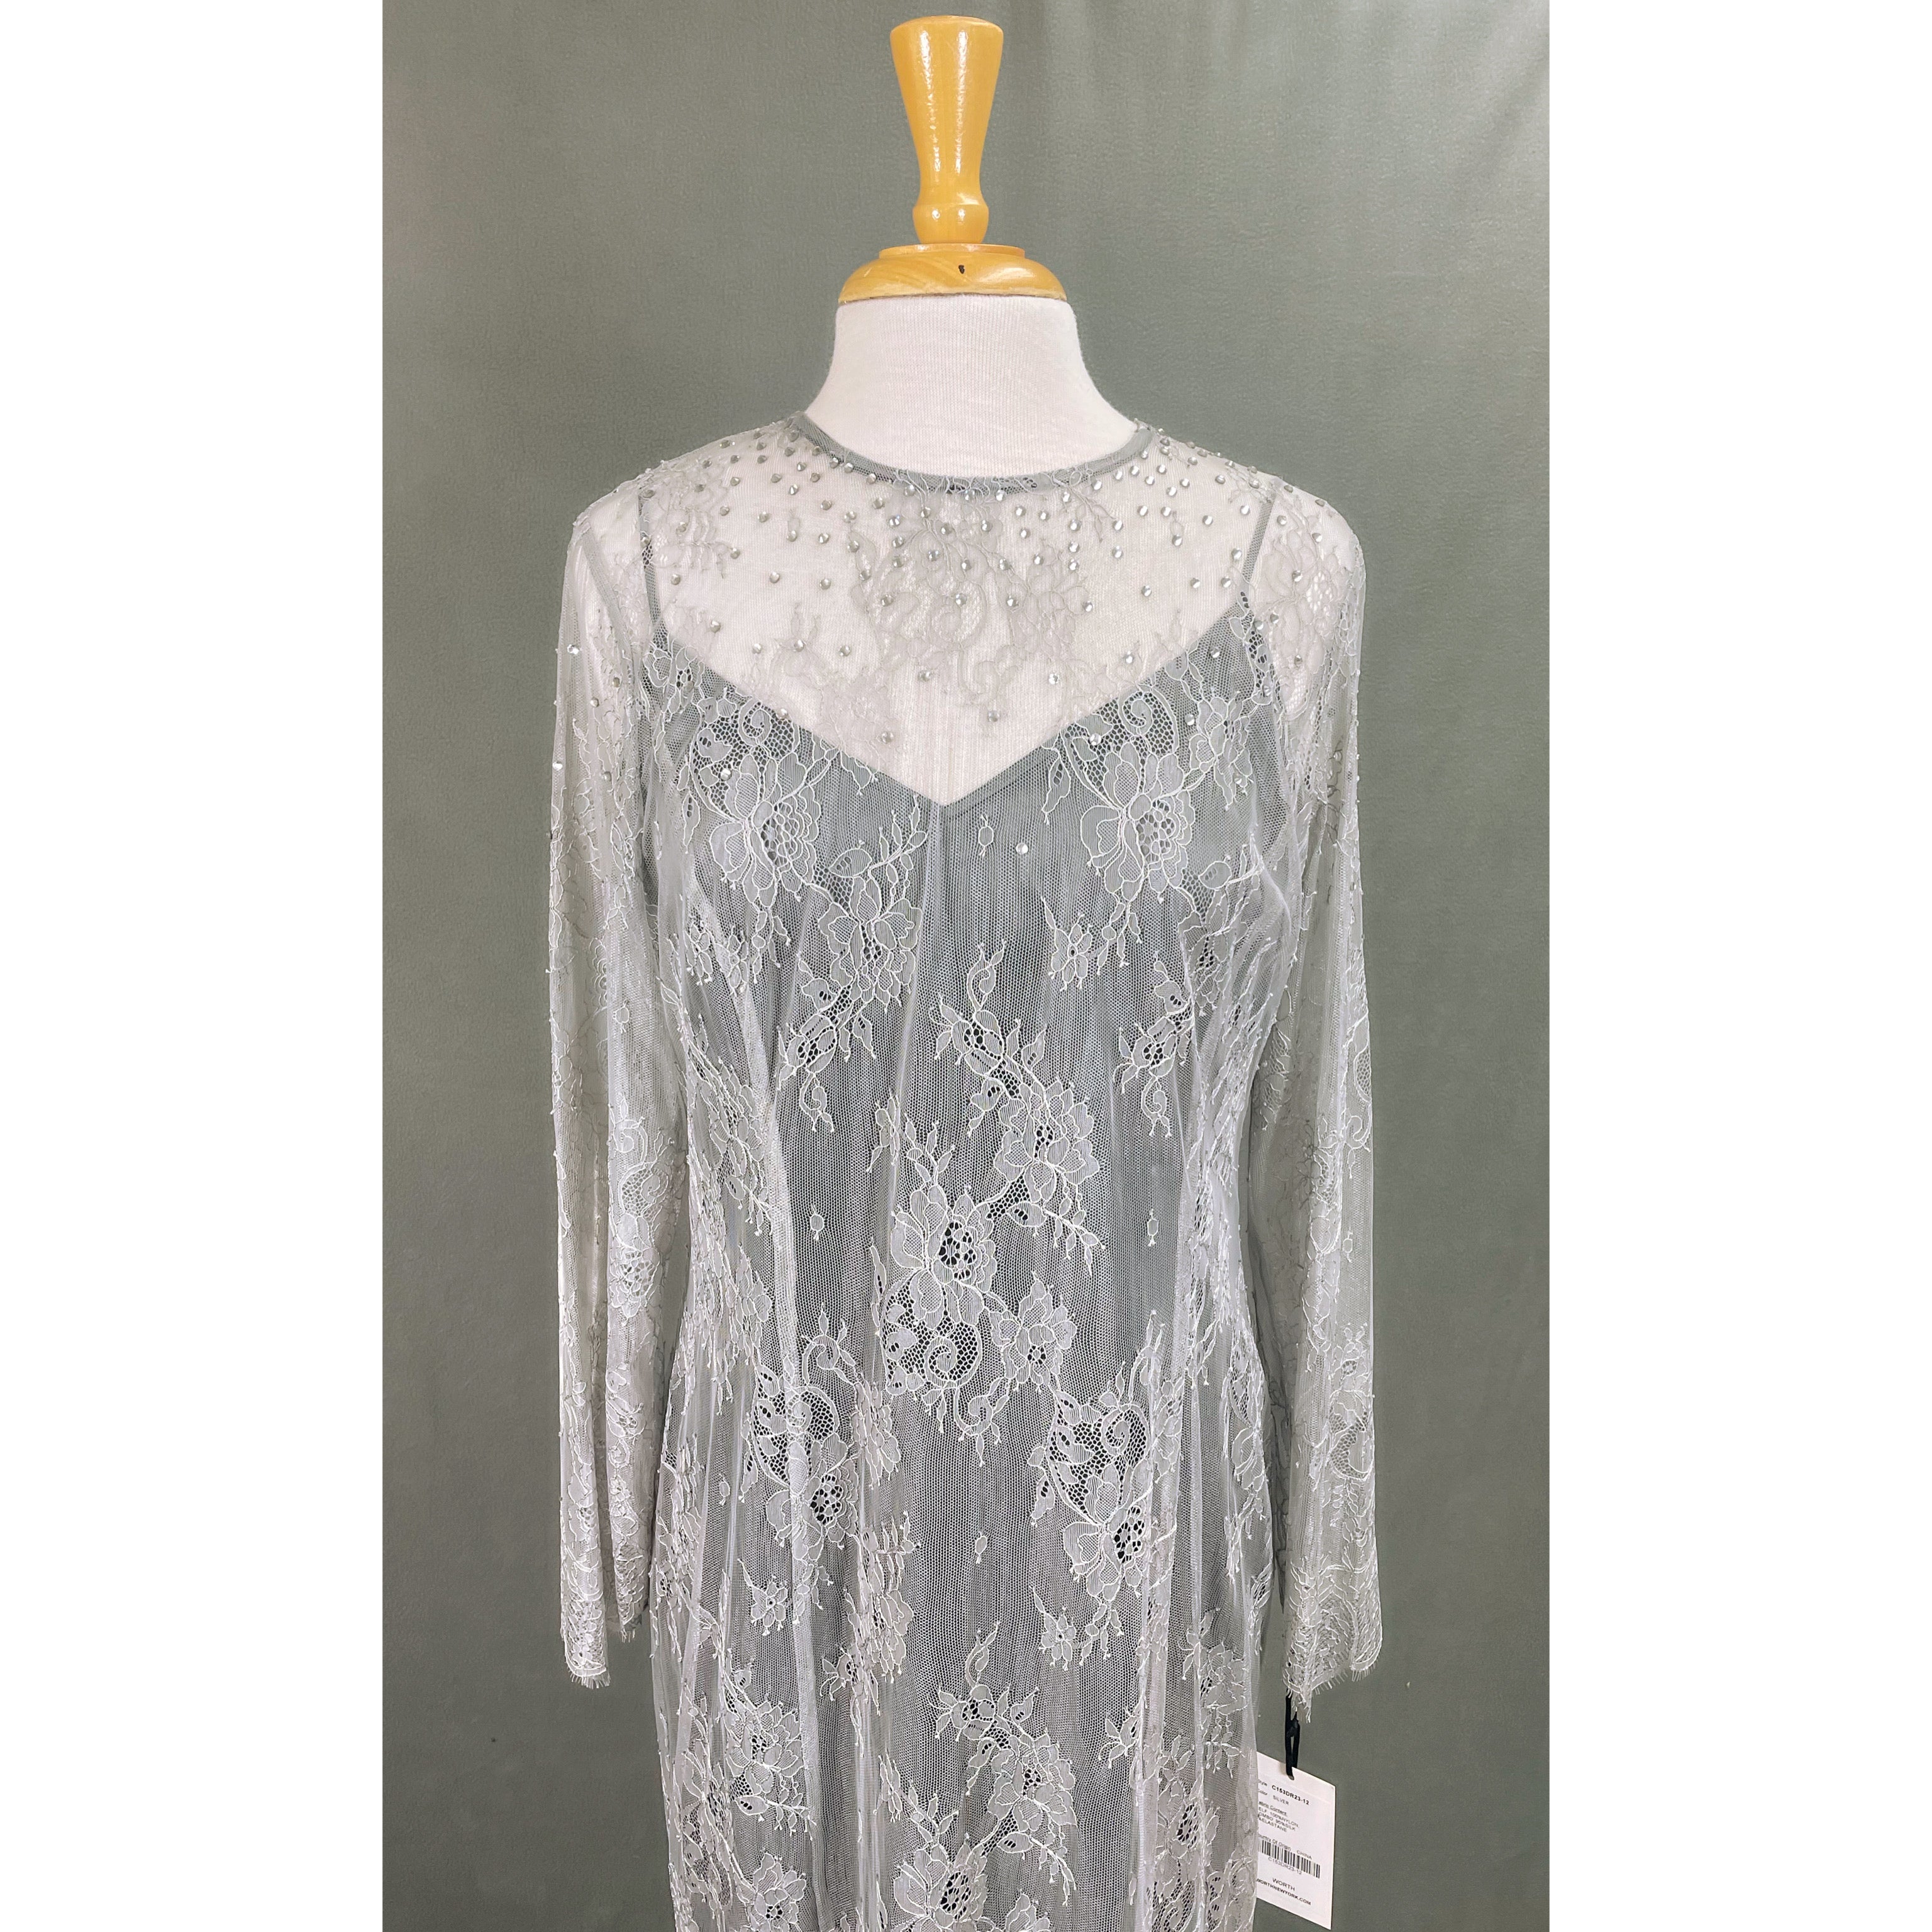 Worth silver lace dress, size 12, NEW WITH TAGS!